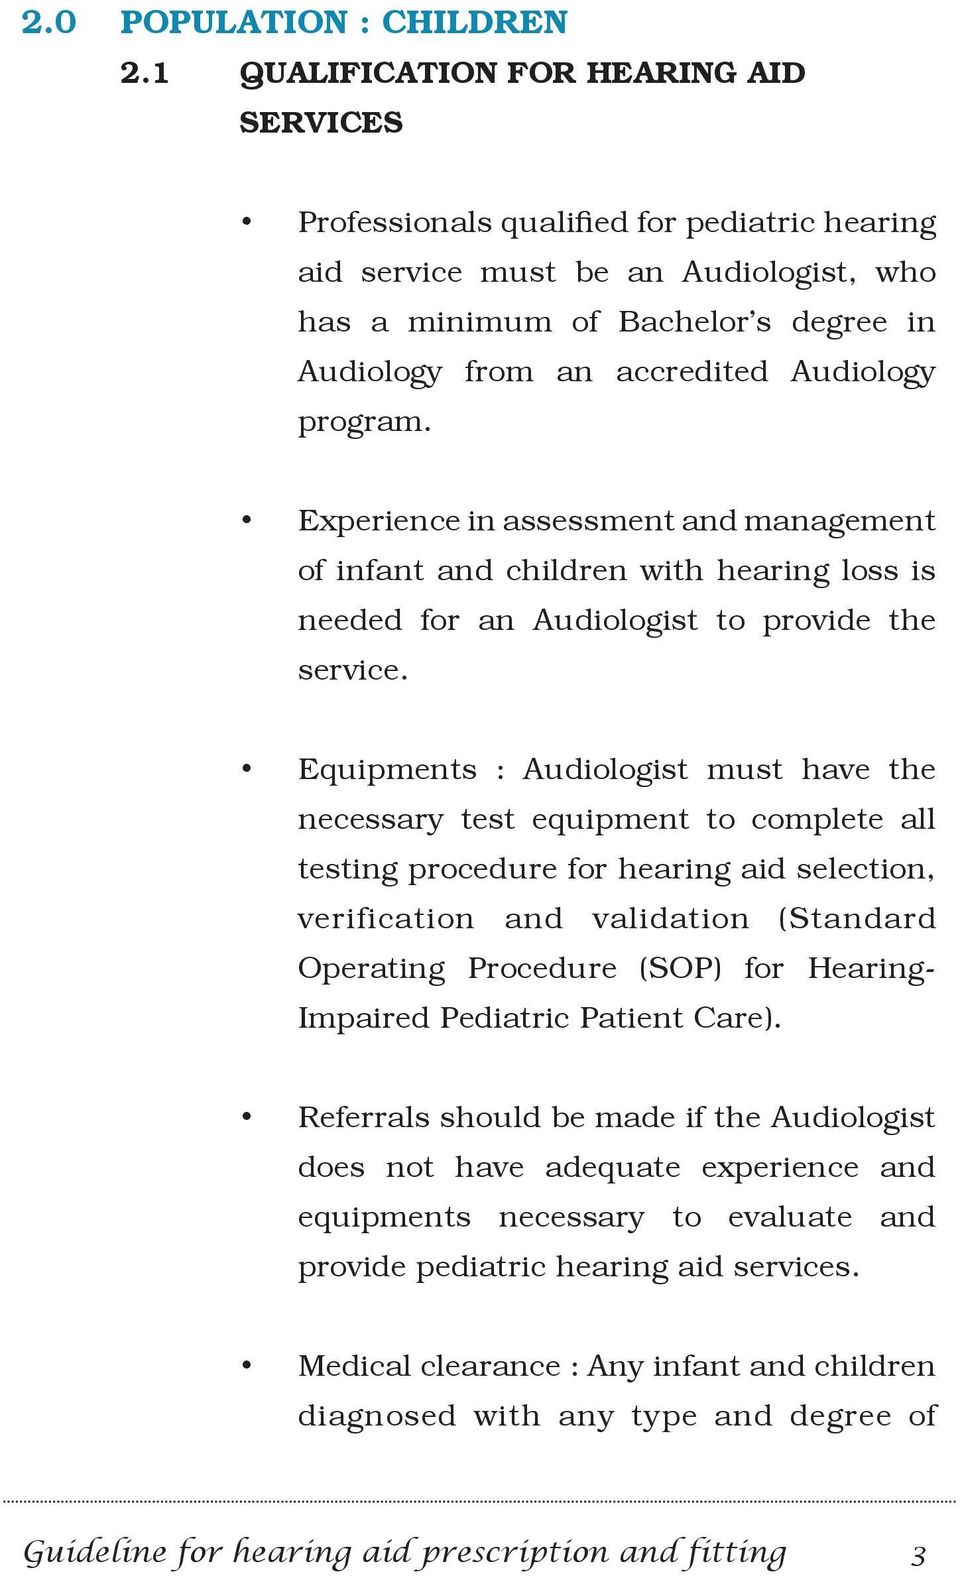 Audiology program. Experience in assessment and management of infant and children with hearing loss is needed for an Audiologist to provide the service.